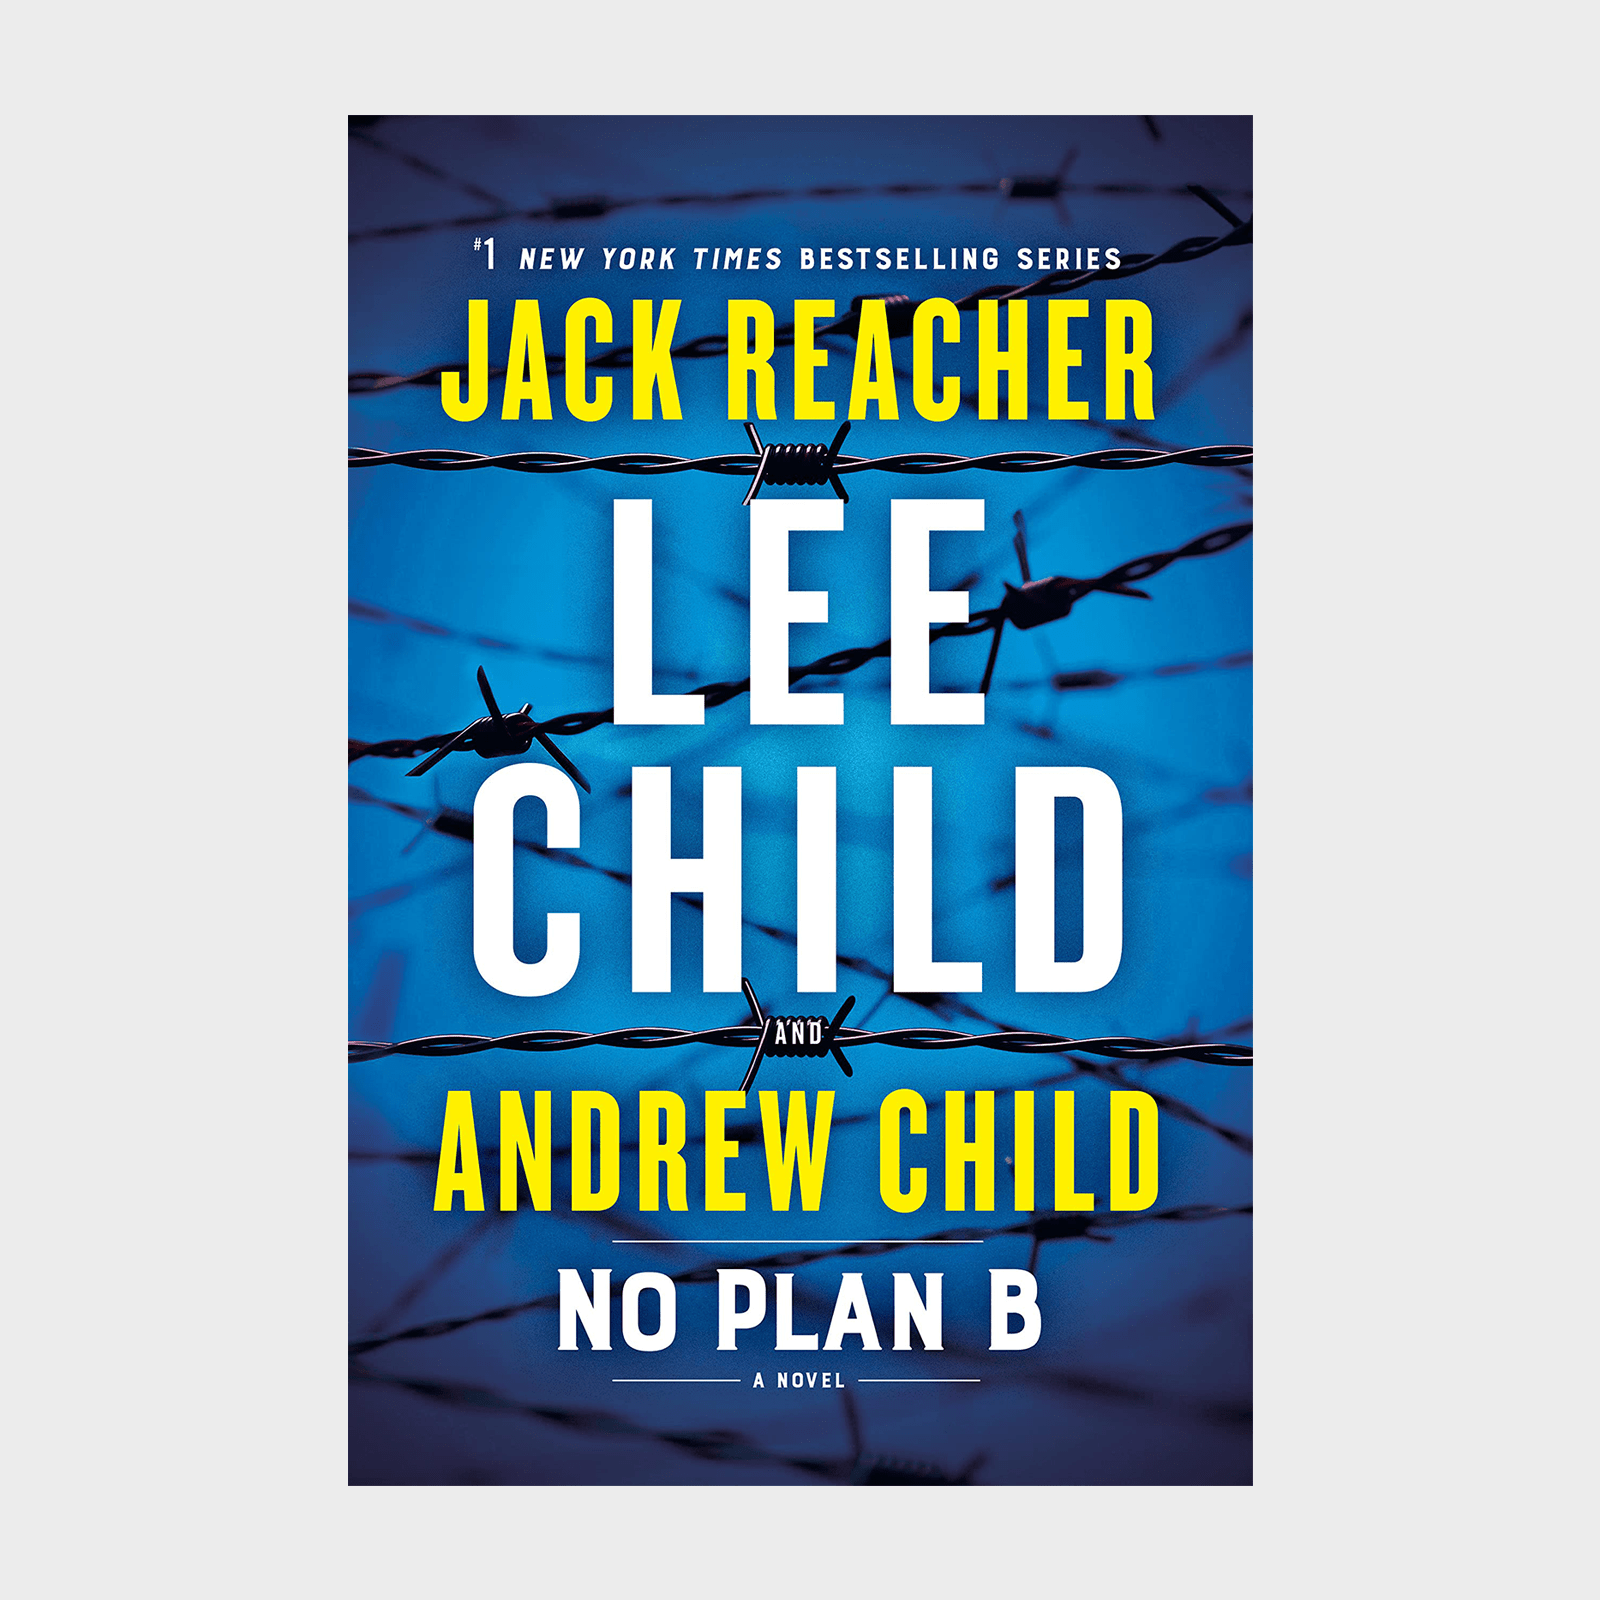 <p class=""><strong>Release date:</strong> Oct. 25, 2022</p> <p>Jack Reacher is back! The <a href="https://www.amazon.com/No-Plan-Jack-Reacher-Novel/dp/1984818546/" rel="noopener noreferrer">27th book</a> of the highly acclaimed thriller series opens with Reacher discovering a purported suicide that he suspects is a murder. As with all books in this series, the plot thickens with additions of global conspiracies, complicated intrigue and supervillains reminiscent of James Bond. If you're only familiar with the Jack Reacher played on screen by Tom Cruise, this book offers a great starting point for reading the whole series.</p> <p class="listicle-page__cta-button-shop"><a class="shop-btn" href="https://www.amazon.com/No-Plan-Jack-Reacher-Novel/dp/1984818546/">Shop Now</a></p>